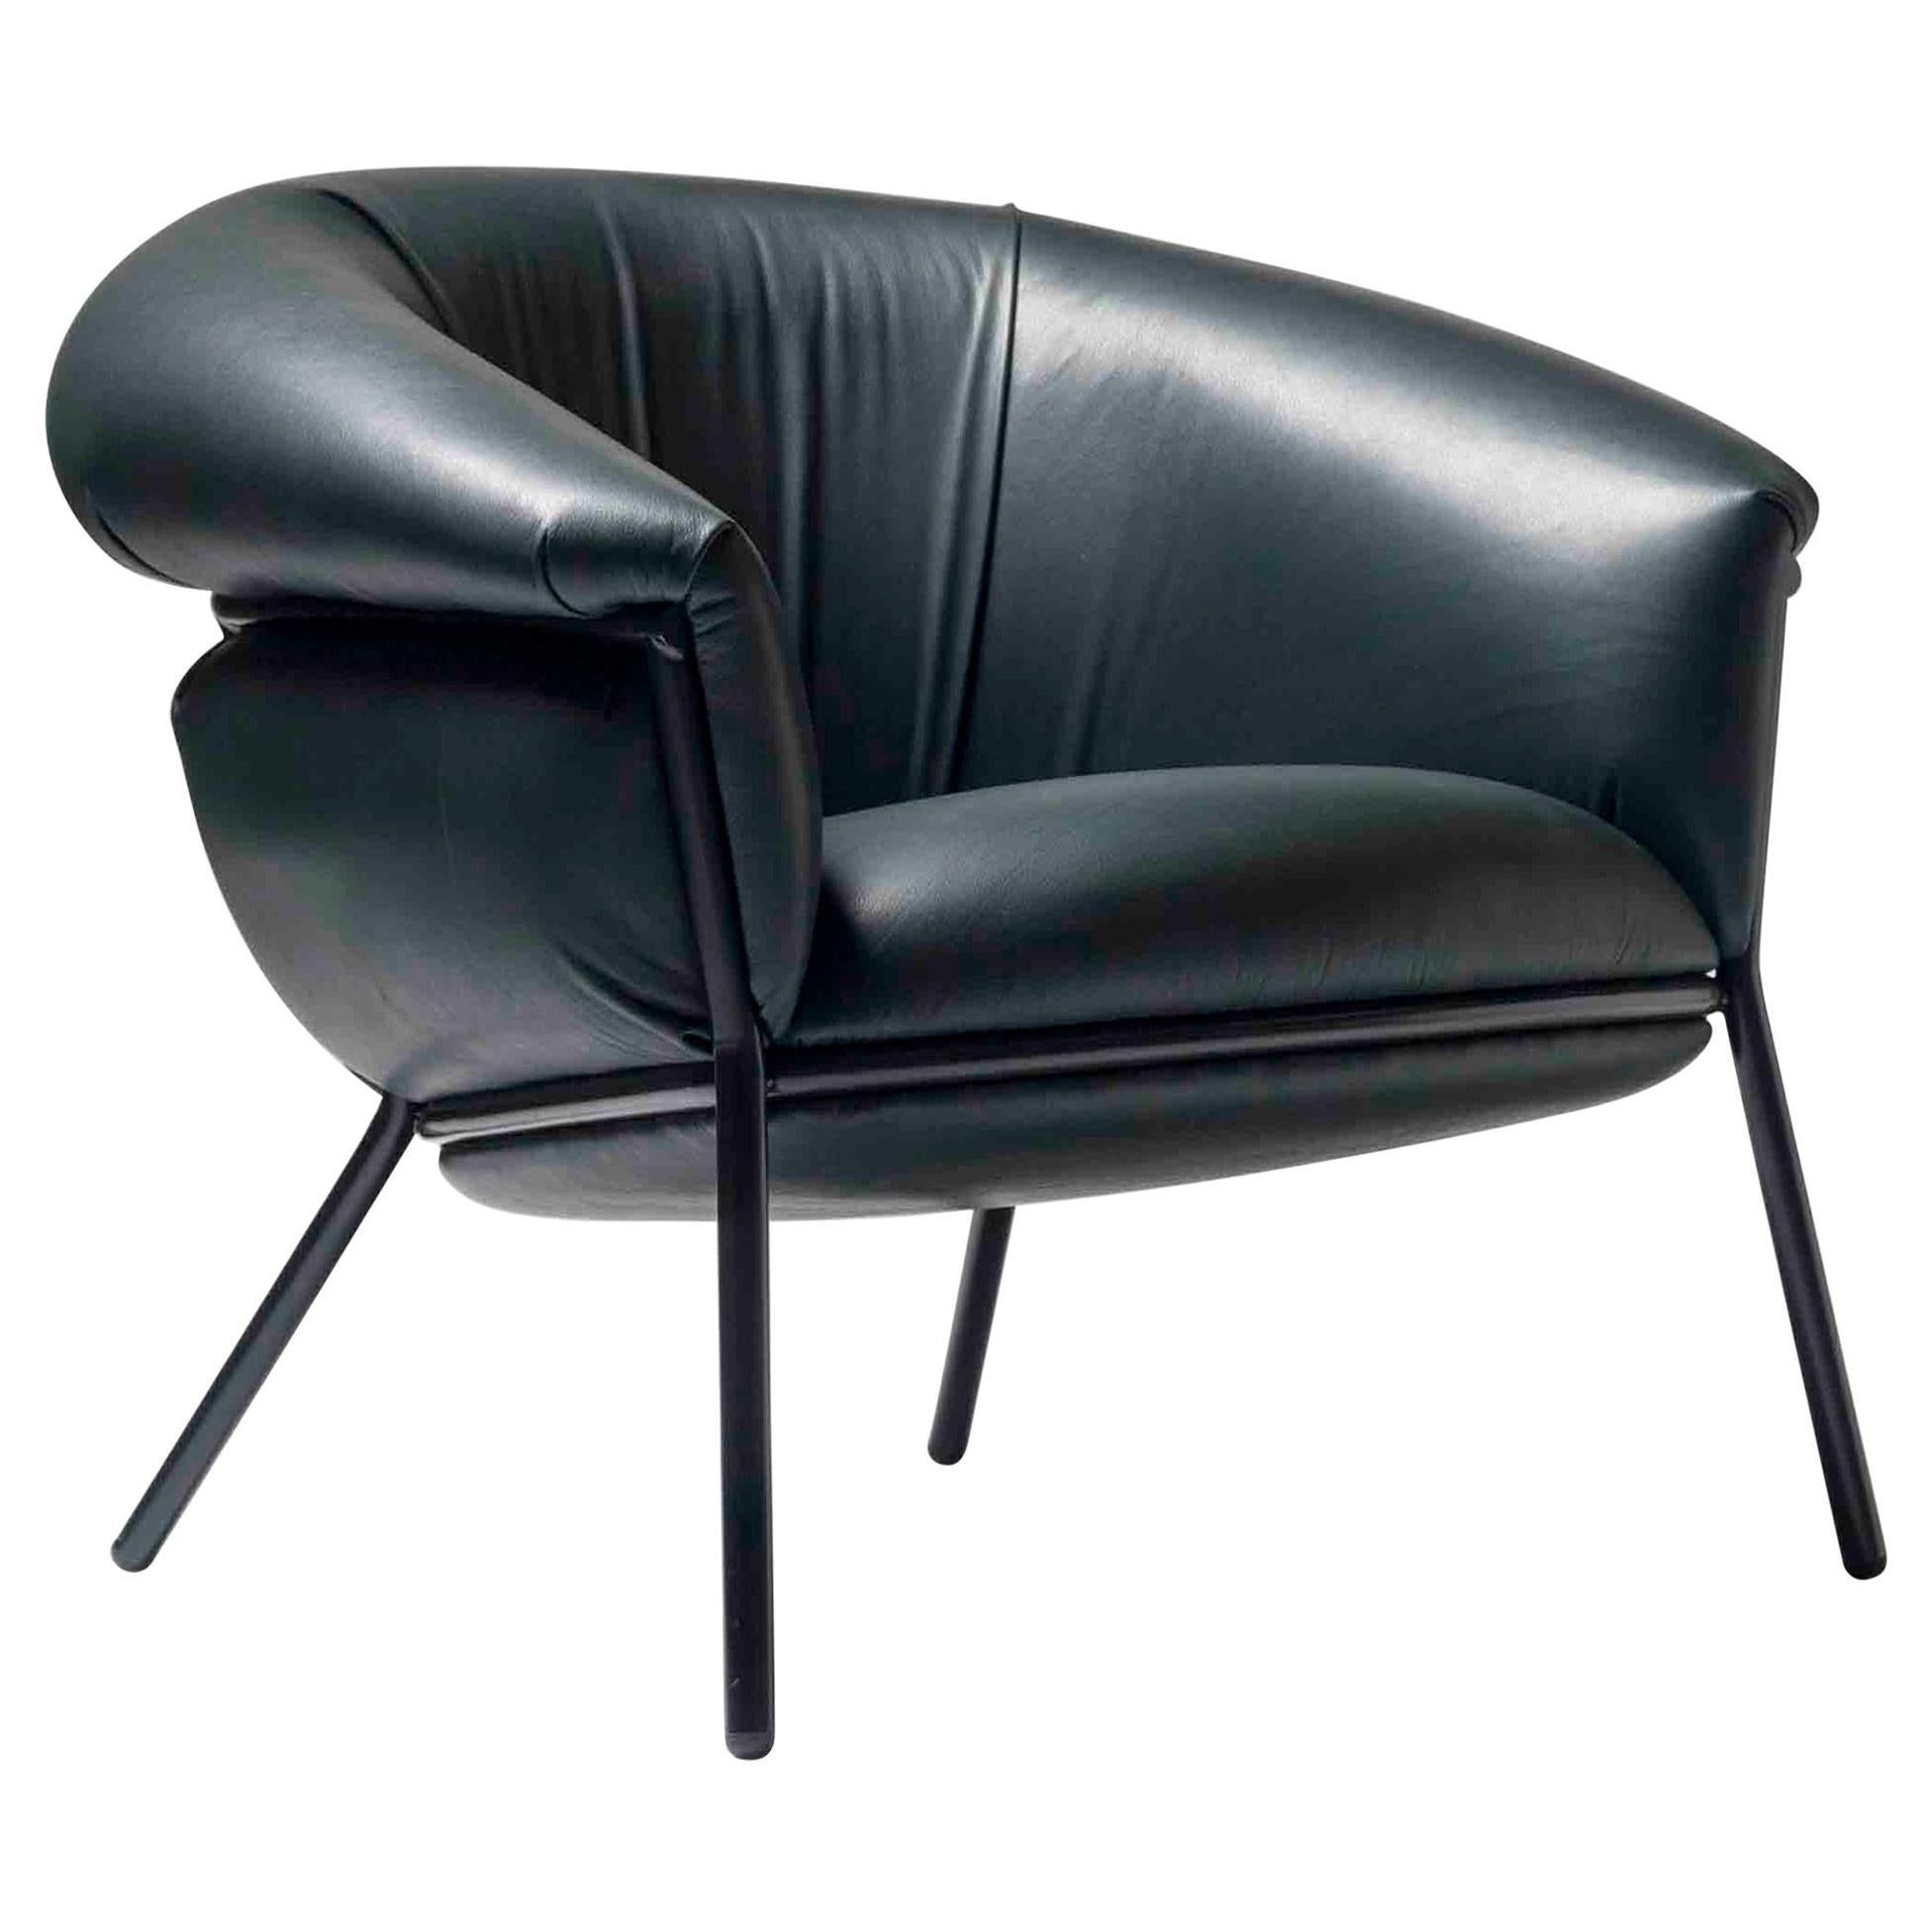 Armchair designed by Stephen Bruks manufactured by BD Barcelona.

An iron tubular (25mm) structured armchair. Seat and backrest upholstered in leather.

The leather upholstery oozes over the bare iron structure to contrast with the most